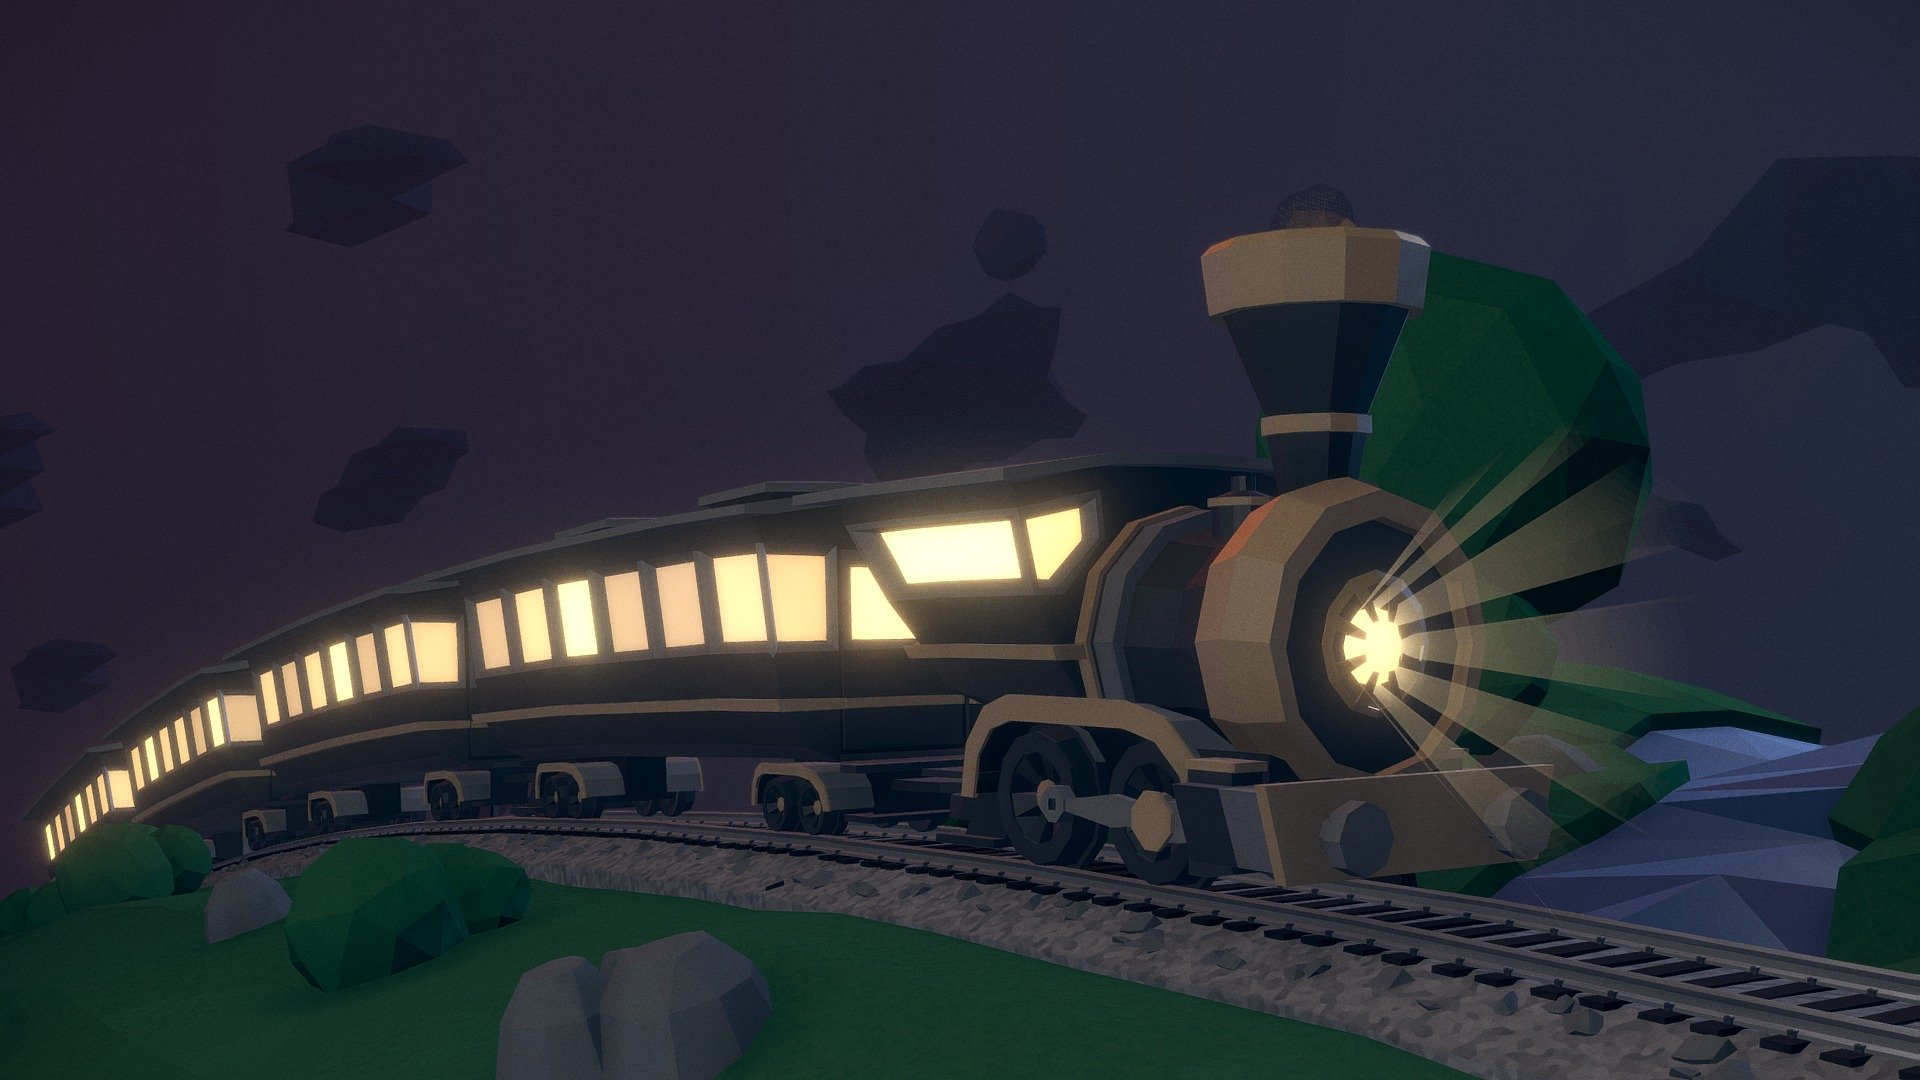 Made a train for fun, then challenged myself to animate it on a curve. Took some doin' since sketchfab doesn't interpret deform modifiers 3d model